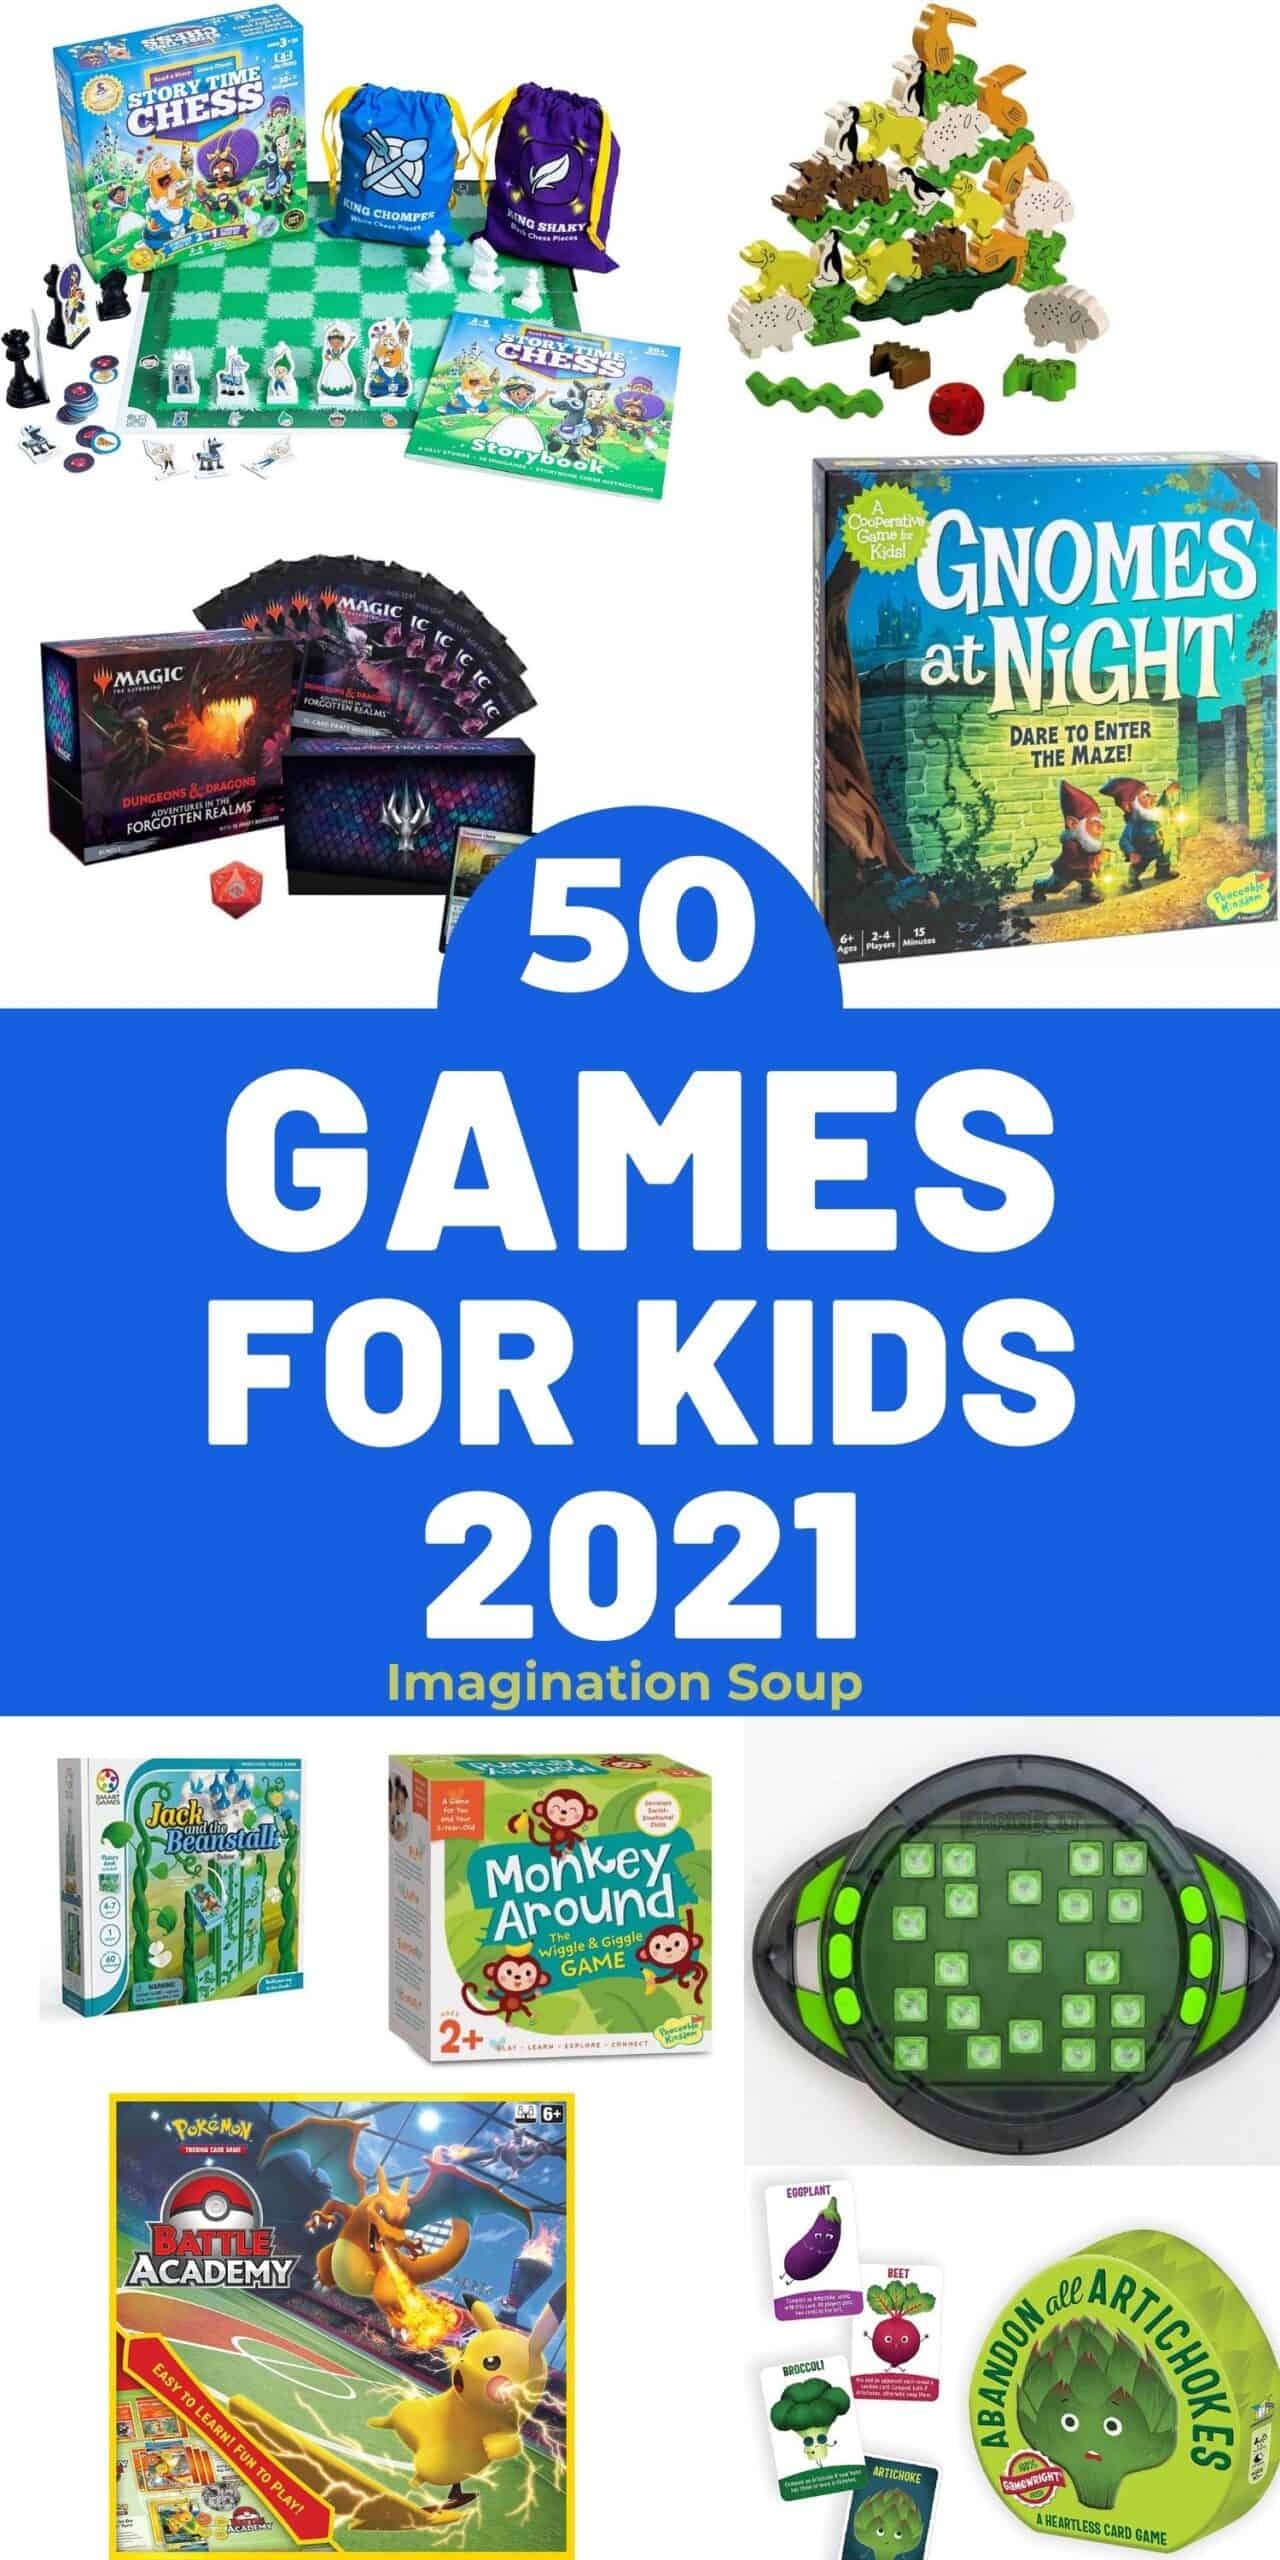 2021 games for families and kids